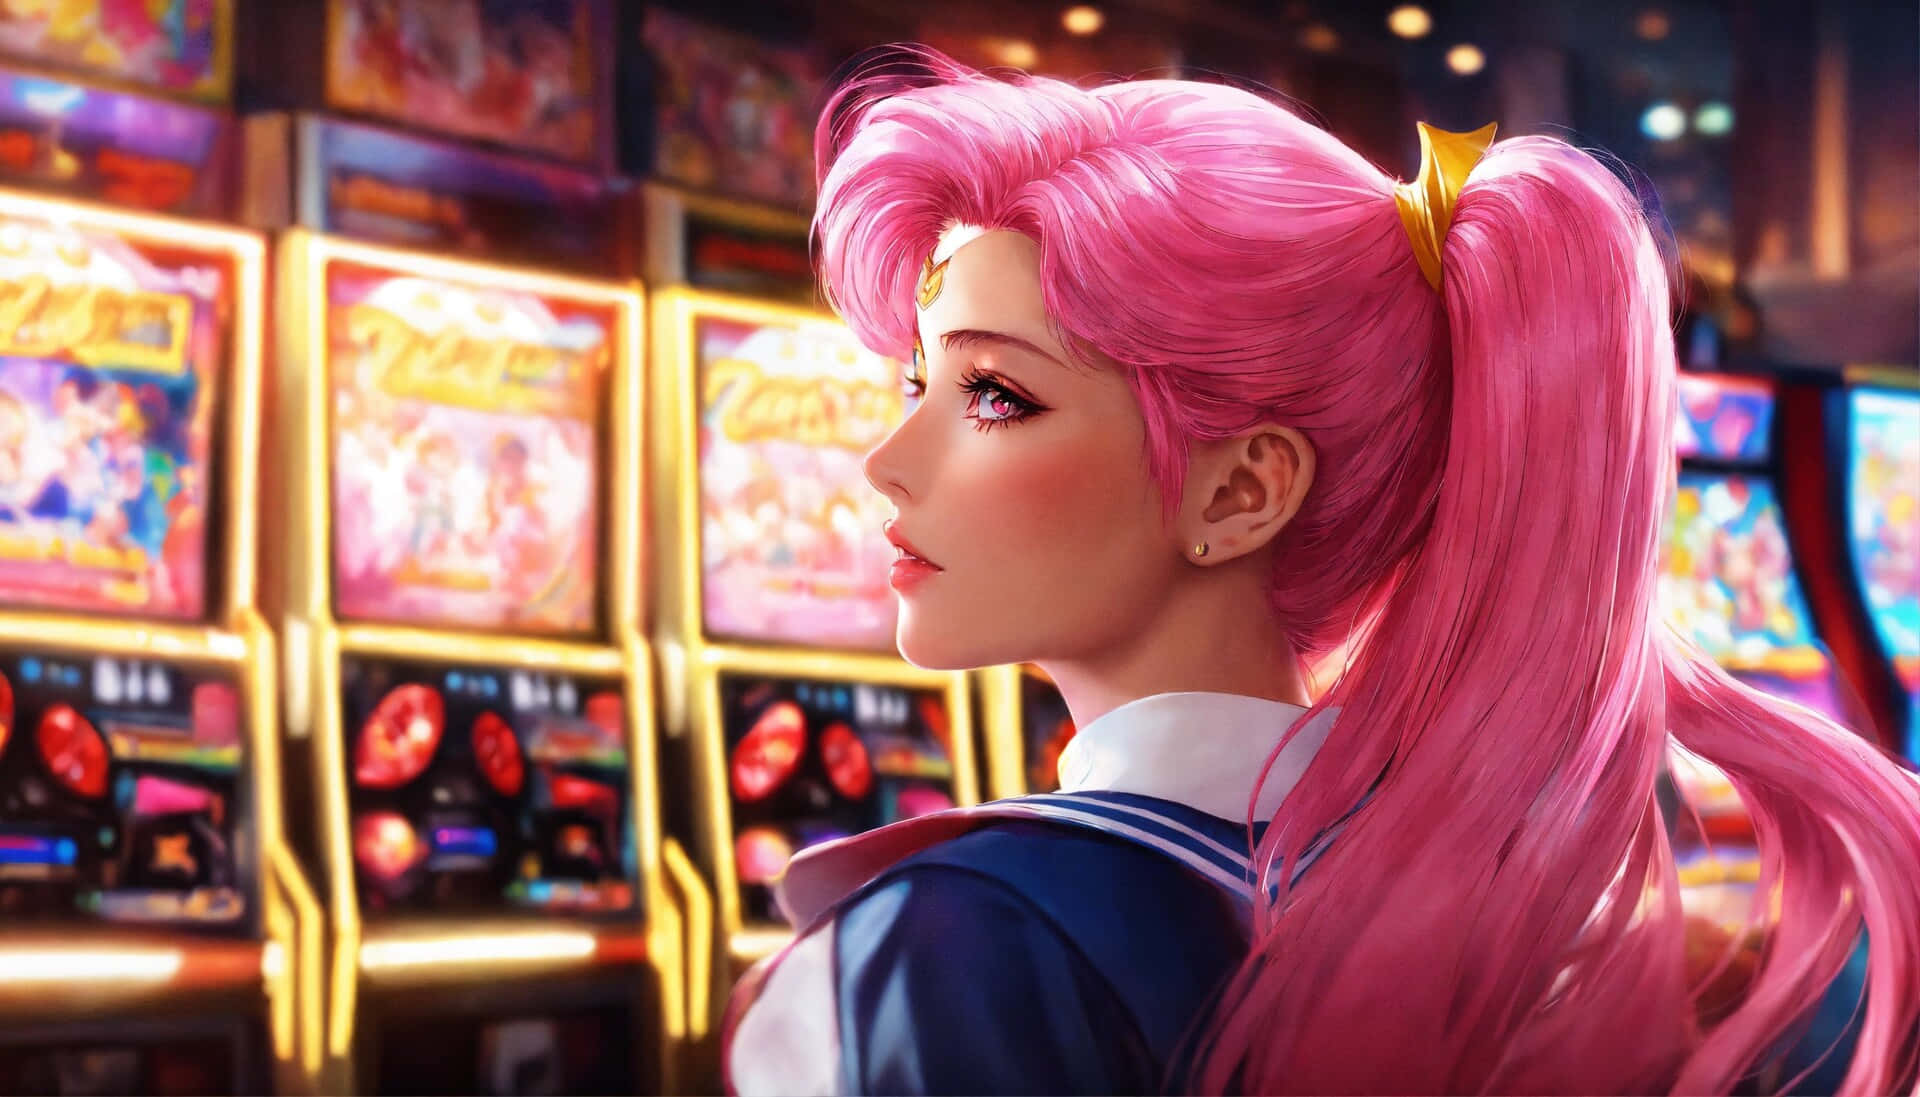 Pink Haired Anime Character Arcade Backdrop.jpg Wallpaper